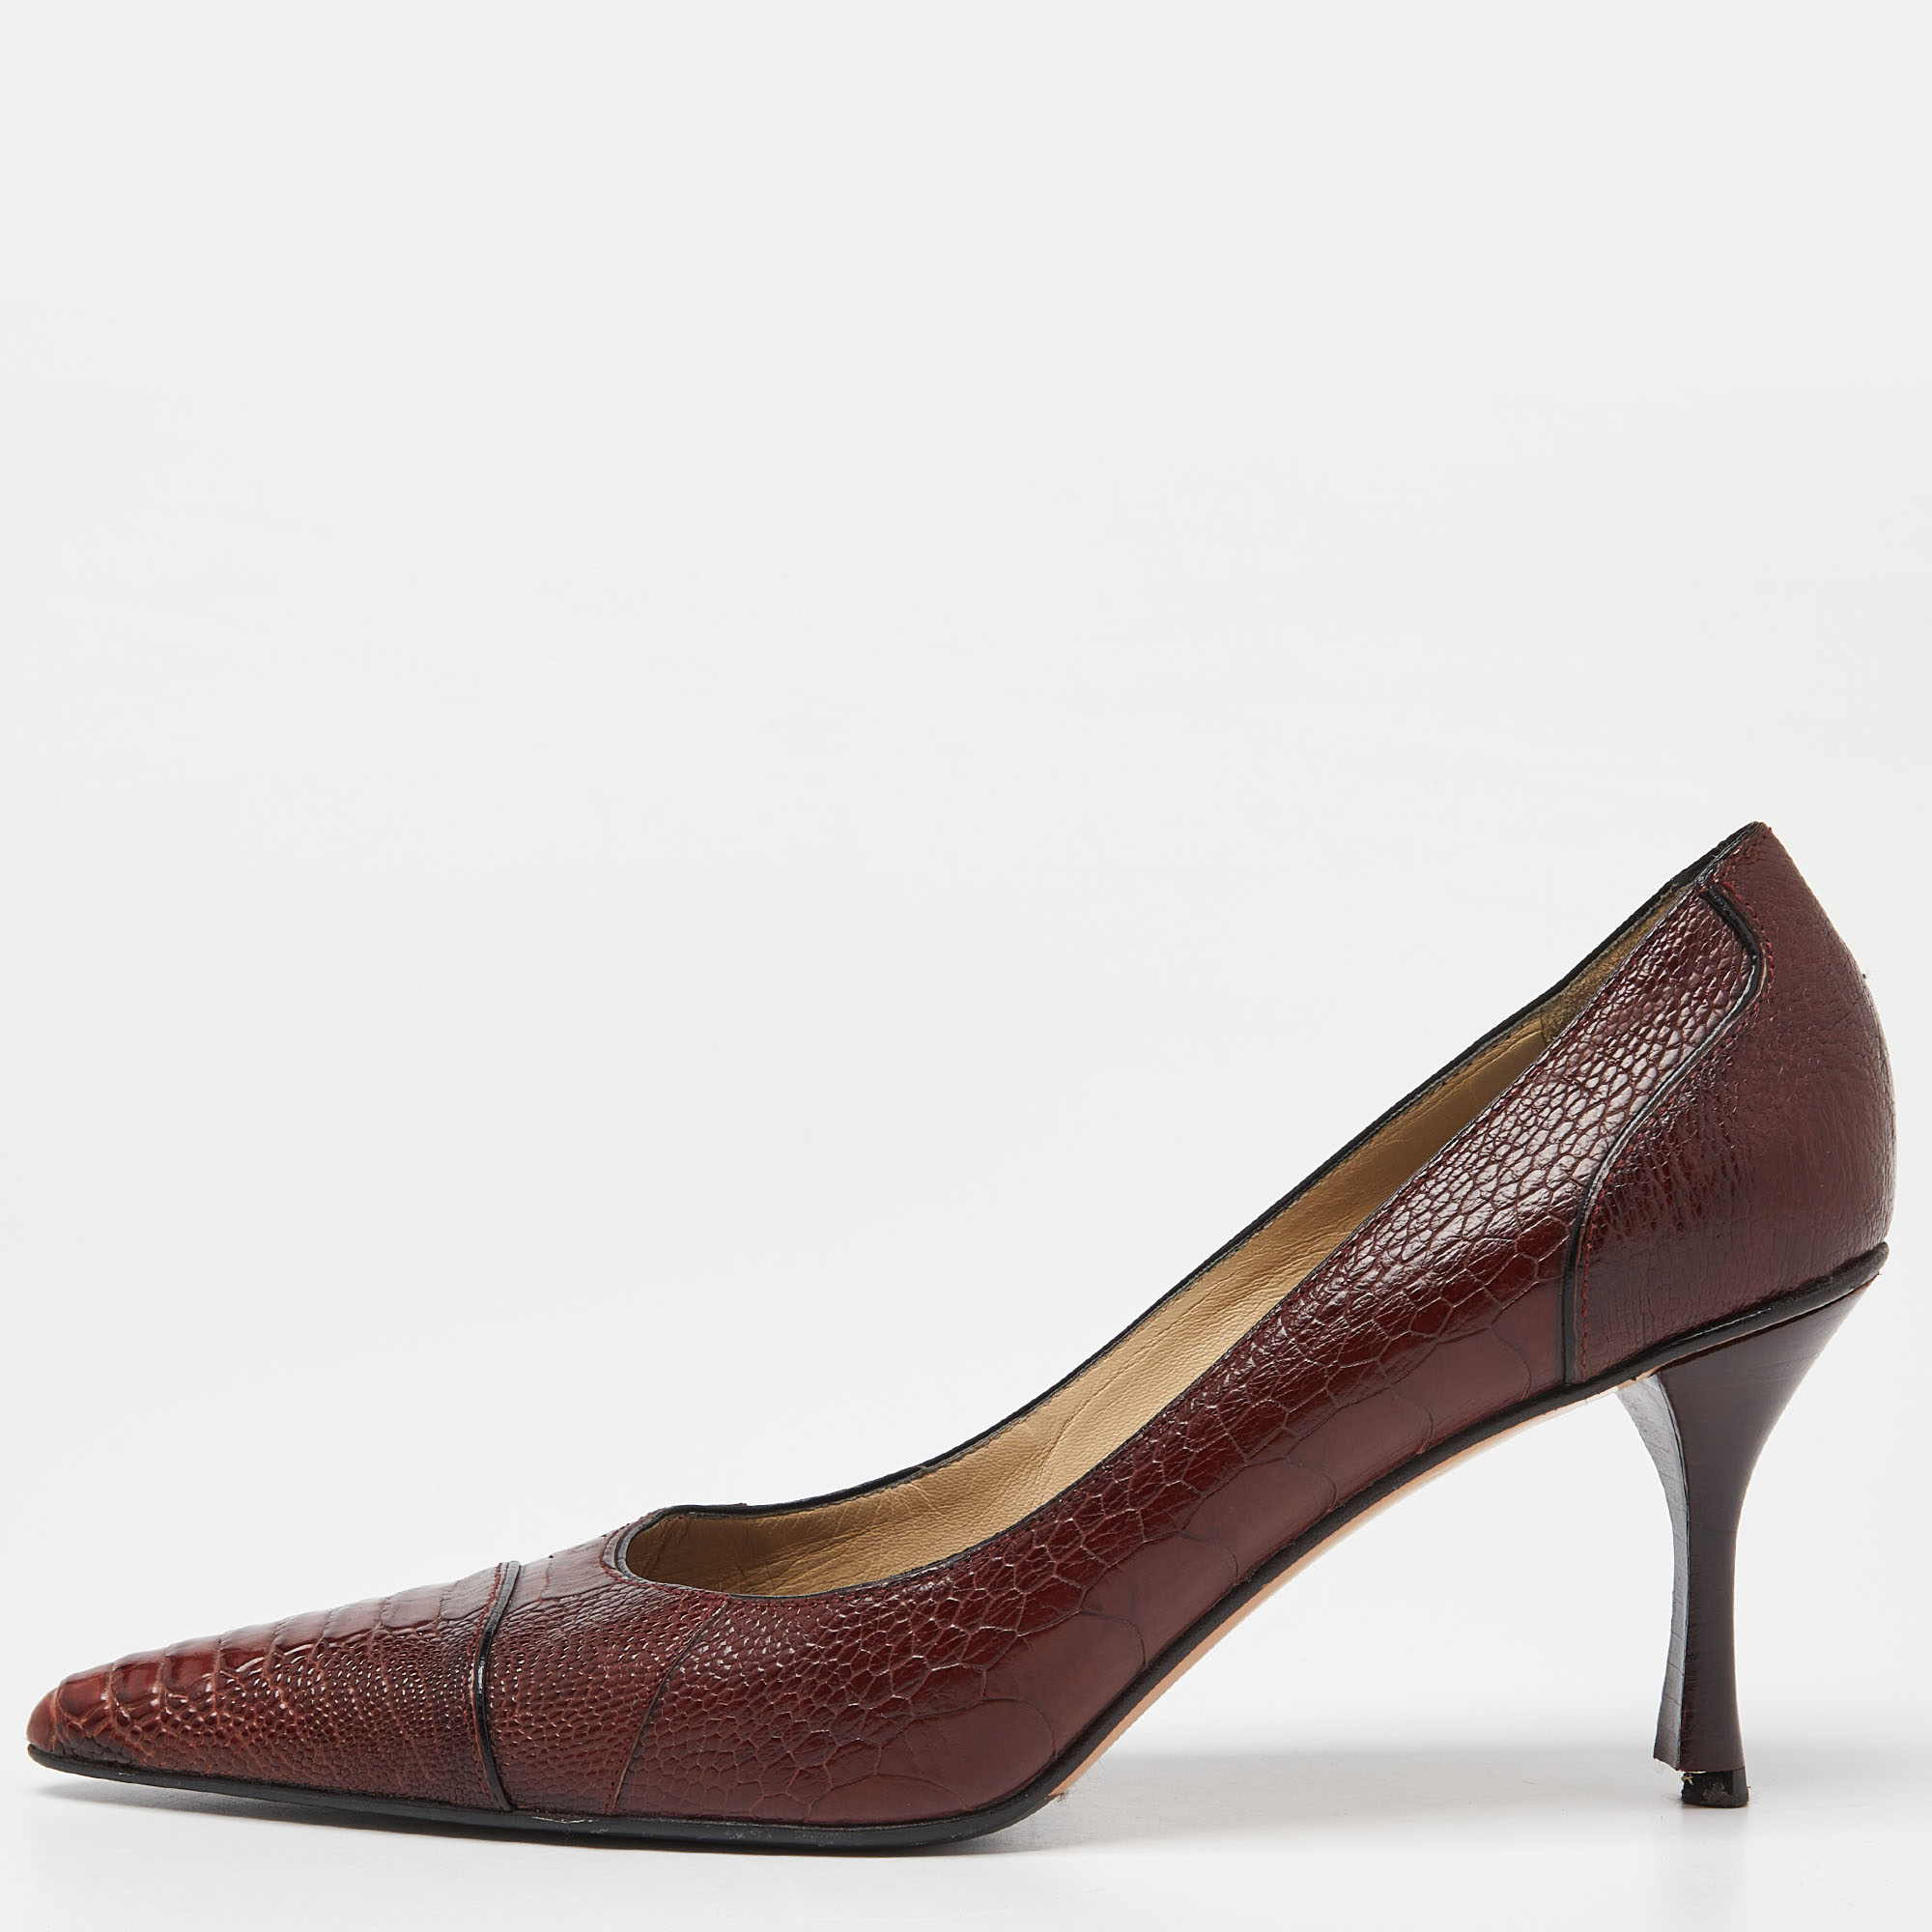 Pre-owned Gucci Brown Crocodile Leather Pointed Toe Pumps Size 38.5